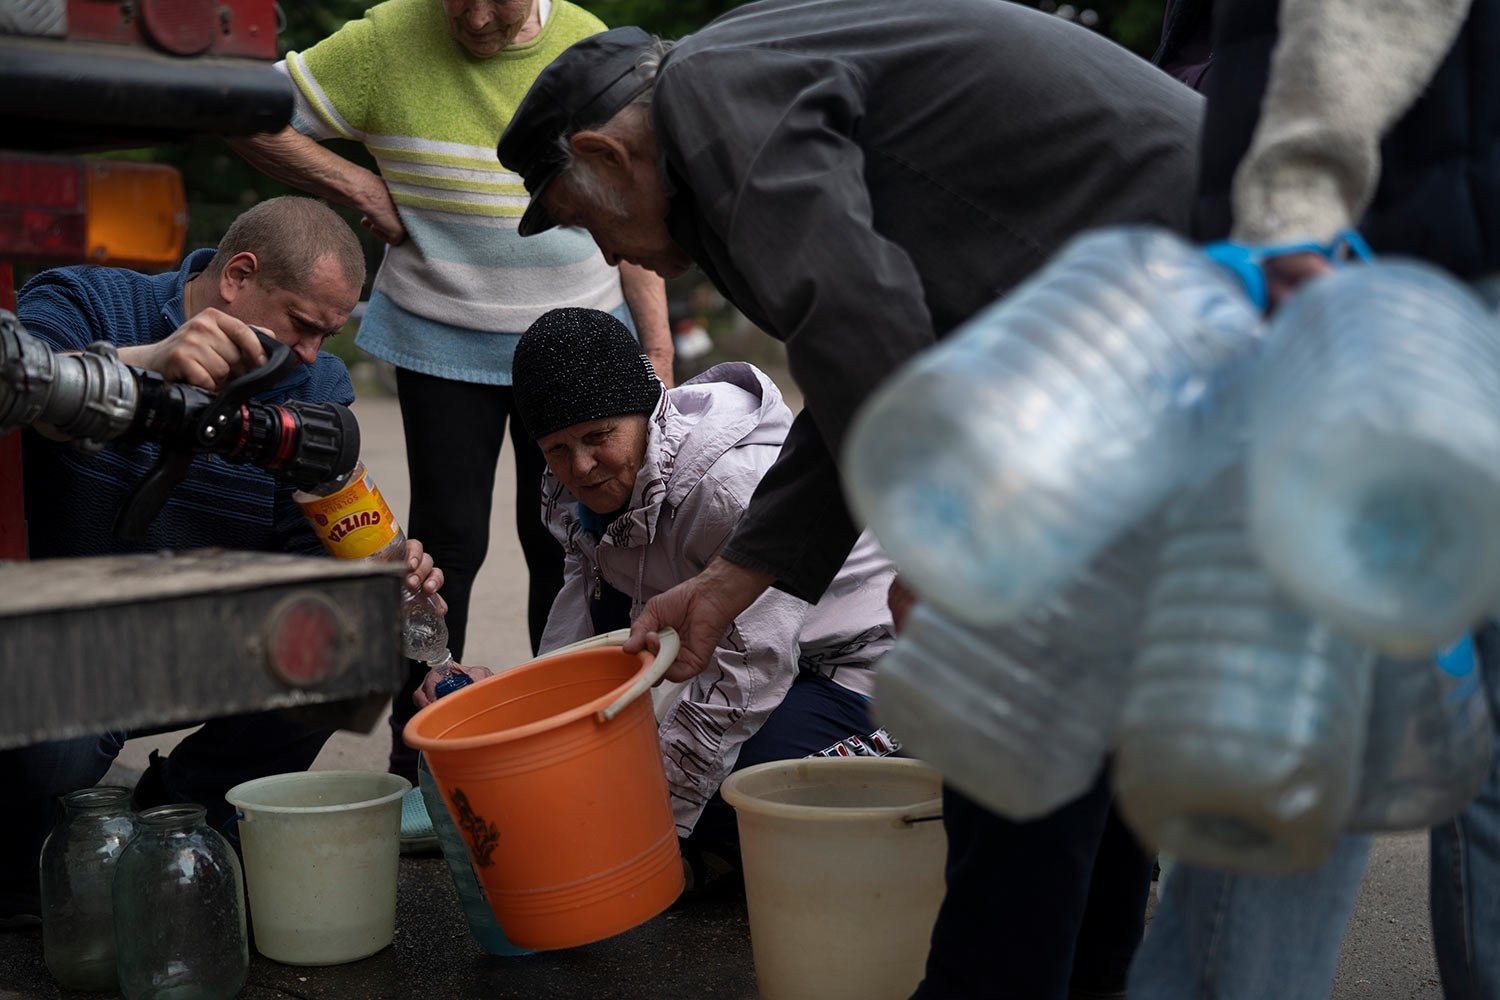  People gather to fill cans with water from a firefighters truck in Lysychansk, Luhansk region, Ukraine, Friday, May 13, 2022. (AP Photo/Leo Correa) 